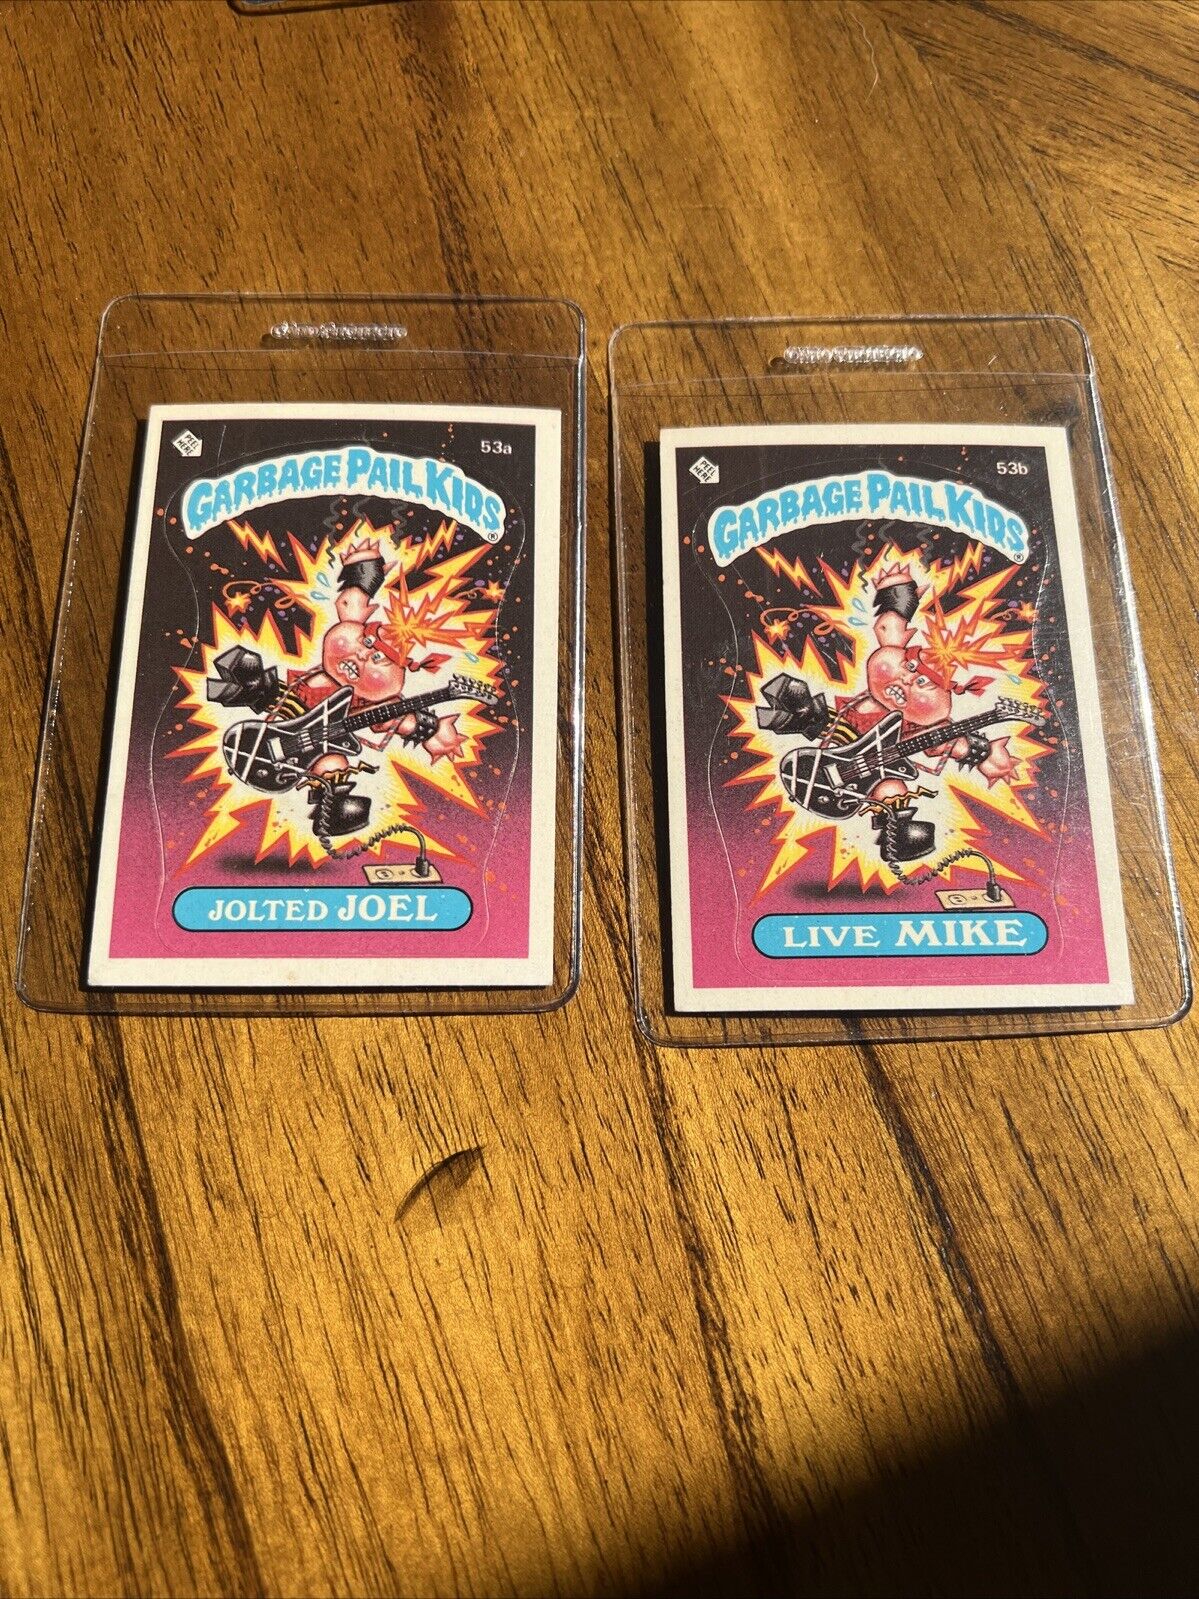 1985 Topps garbage pail kids 53A/53B jolted Joel live Mike